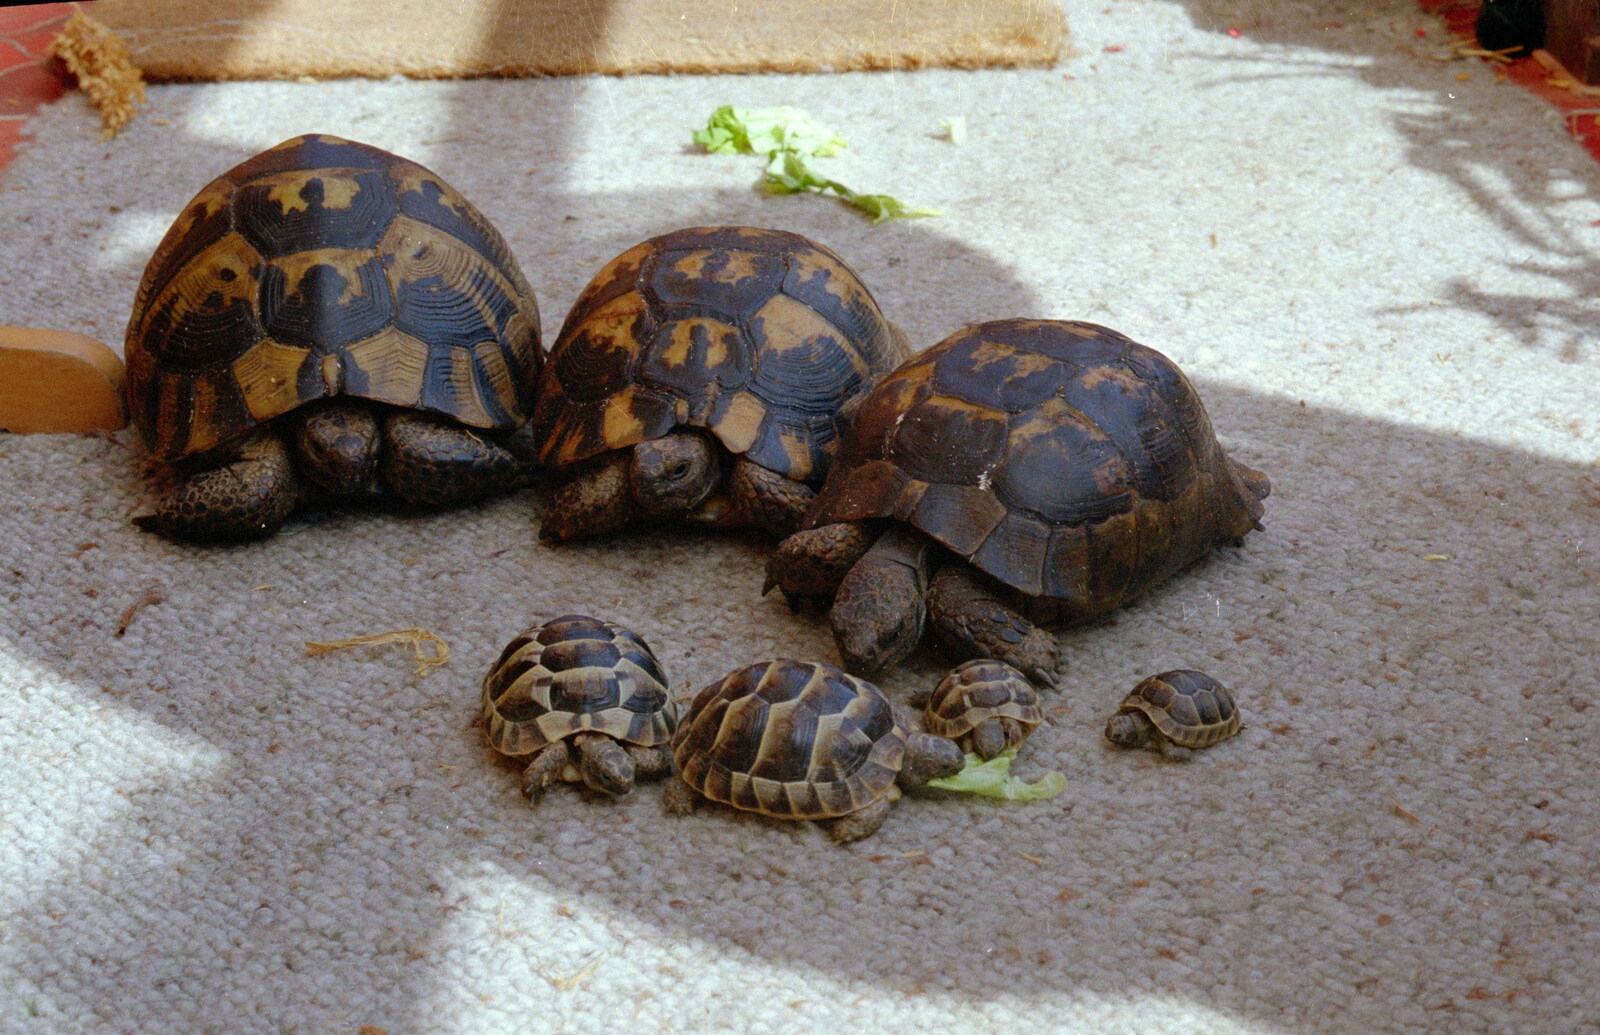 The tortoises eat lettuce from A CB Reunion and a Trip to the Beach, Barton on Sea, Hampshire - 4th April 1986